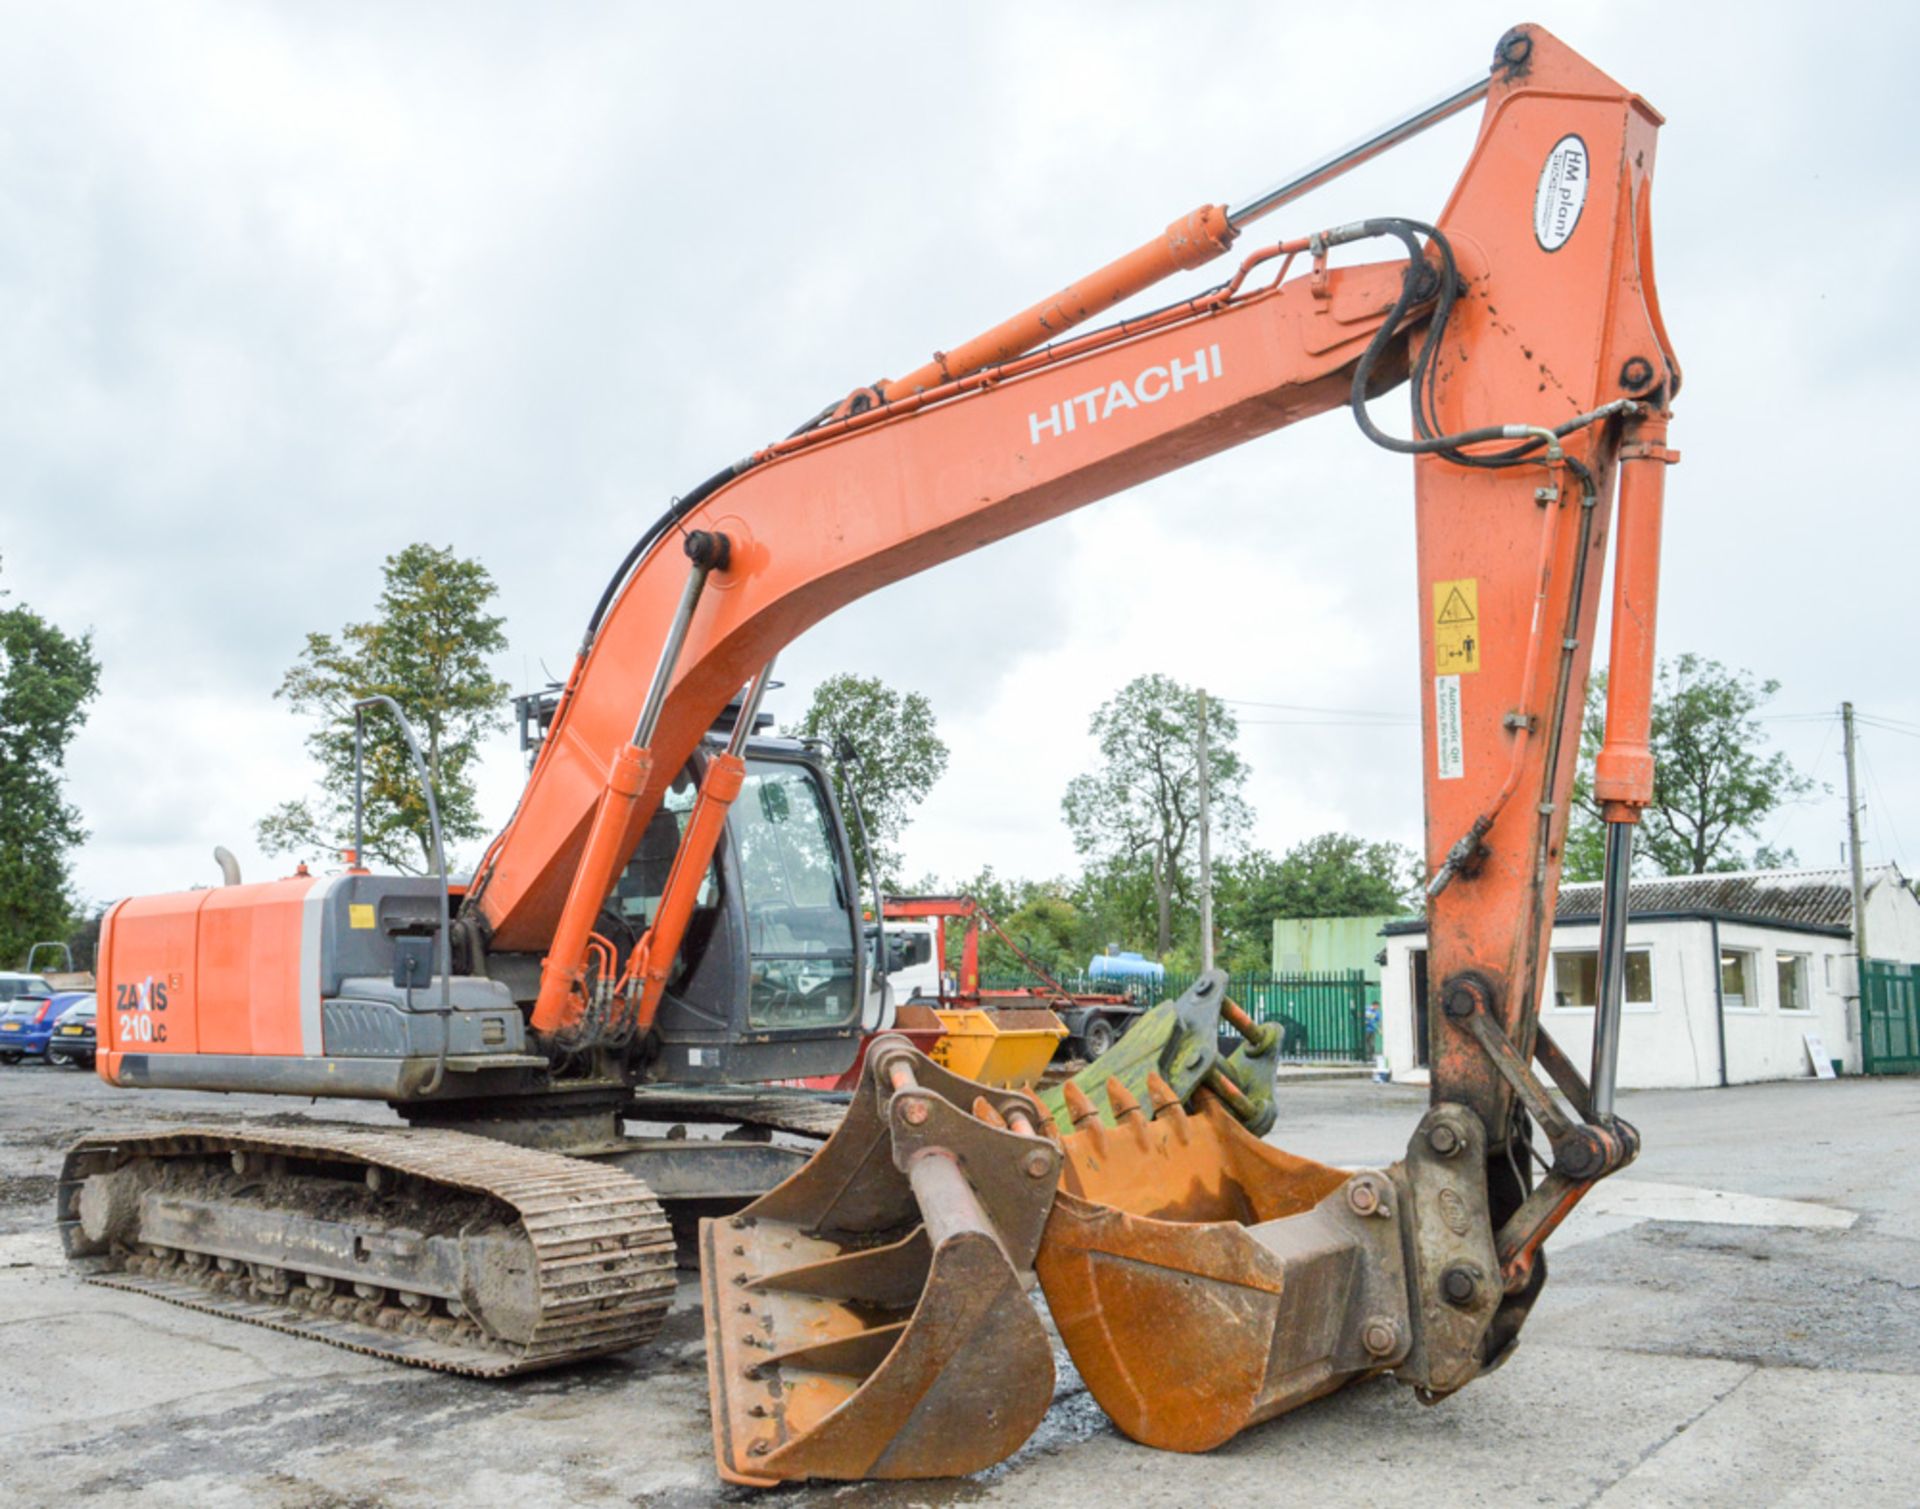 Hitachi Zaxis 210LC 21 tonne steel tracked excavator Year: 2008 S/N: 601306 Recorded Hours: 6876 - Bild 4 aus 15